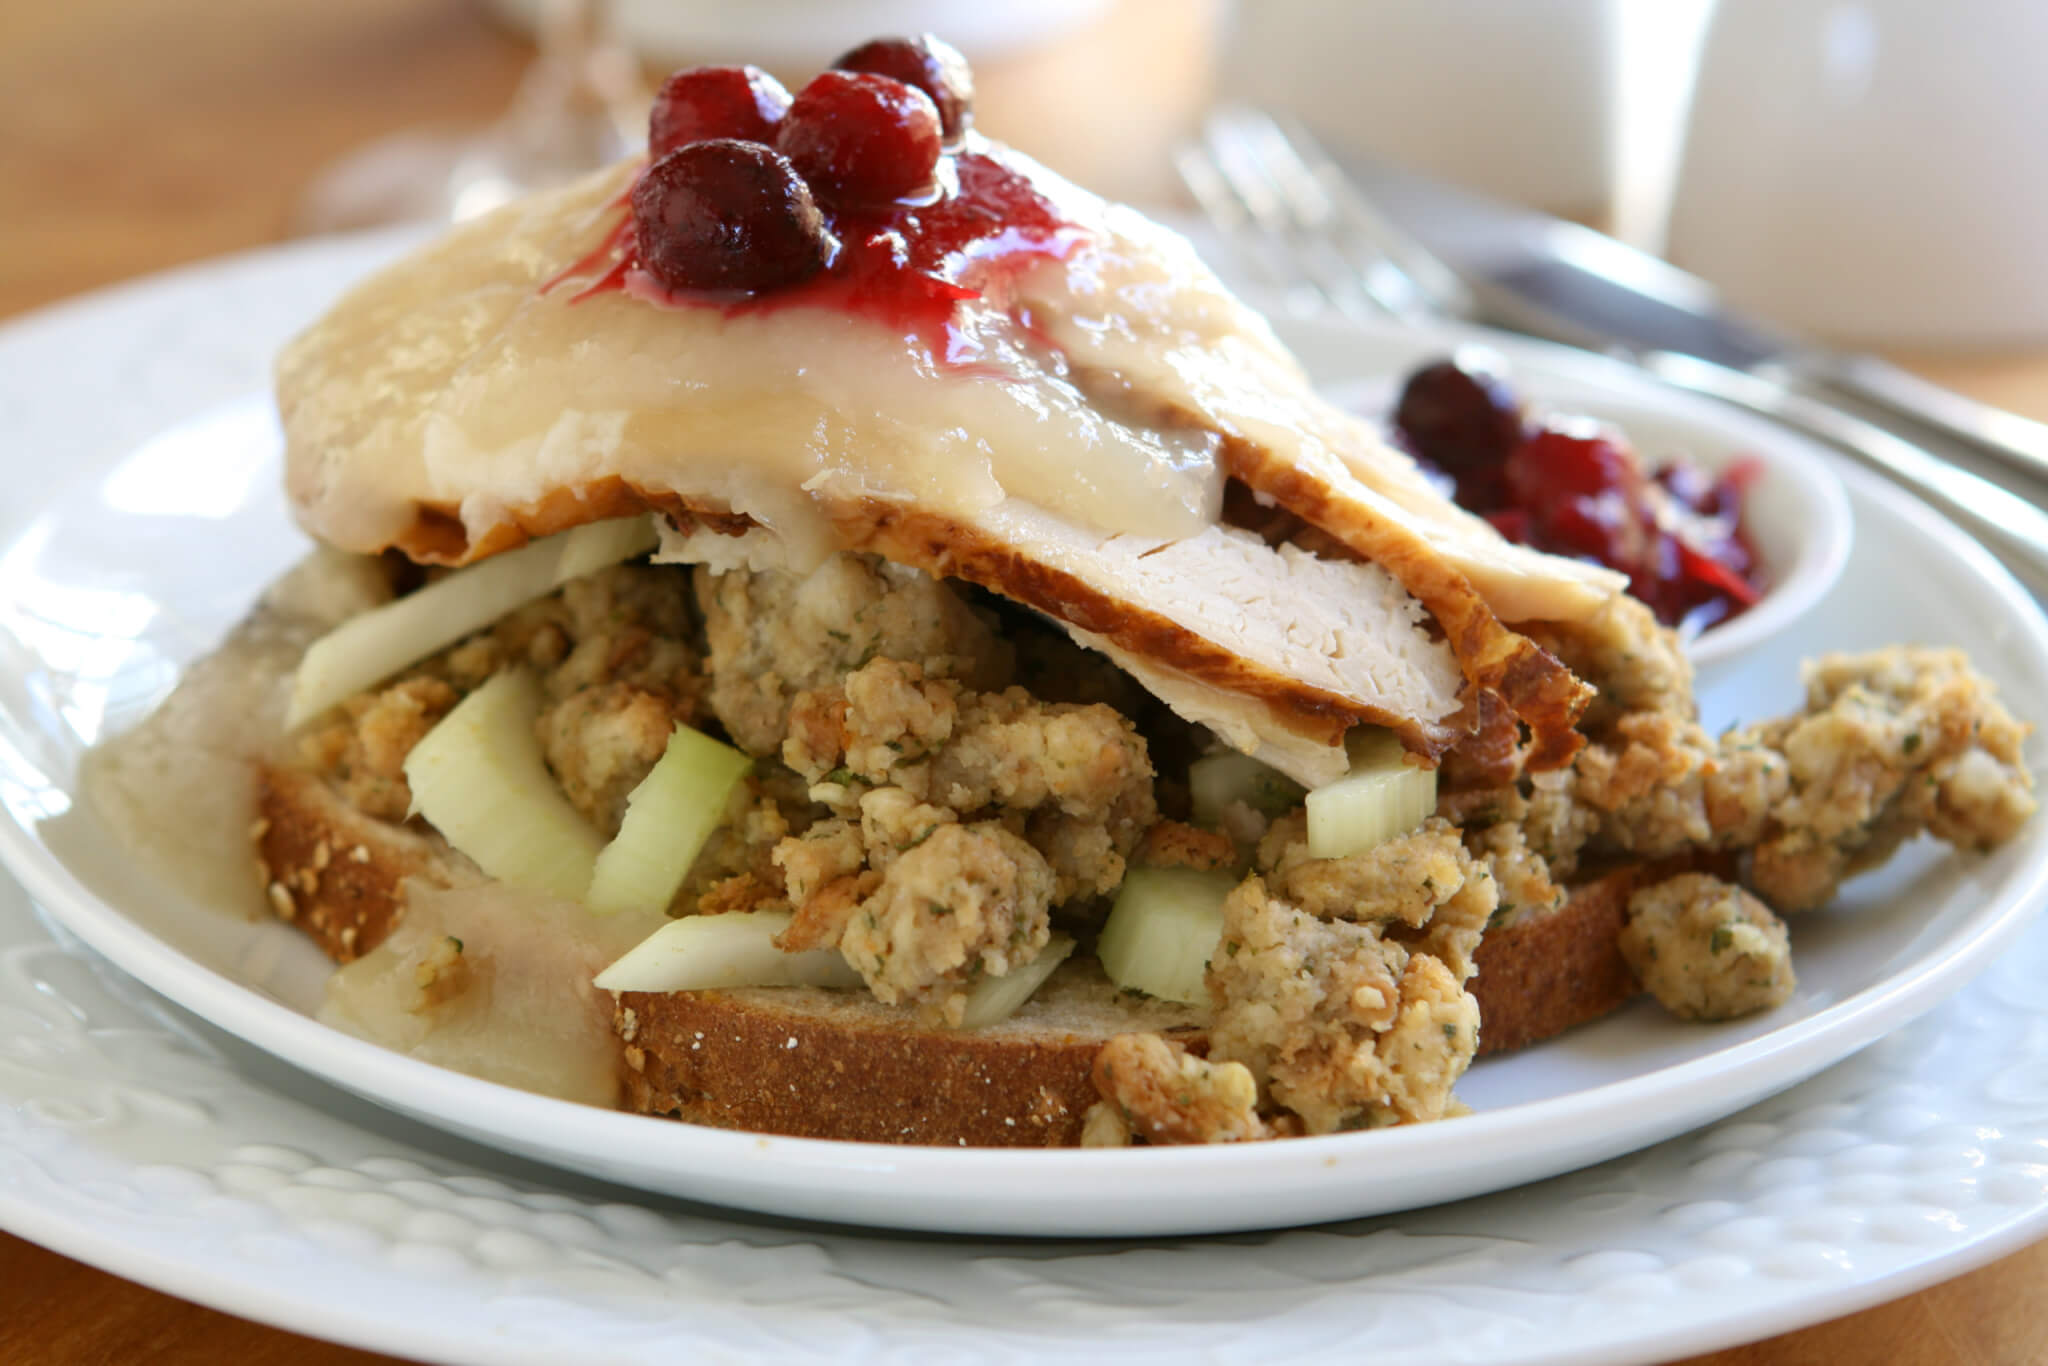 Thanksgiving plate with turkey, stuffing, cranberry sauce